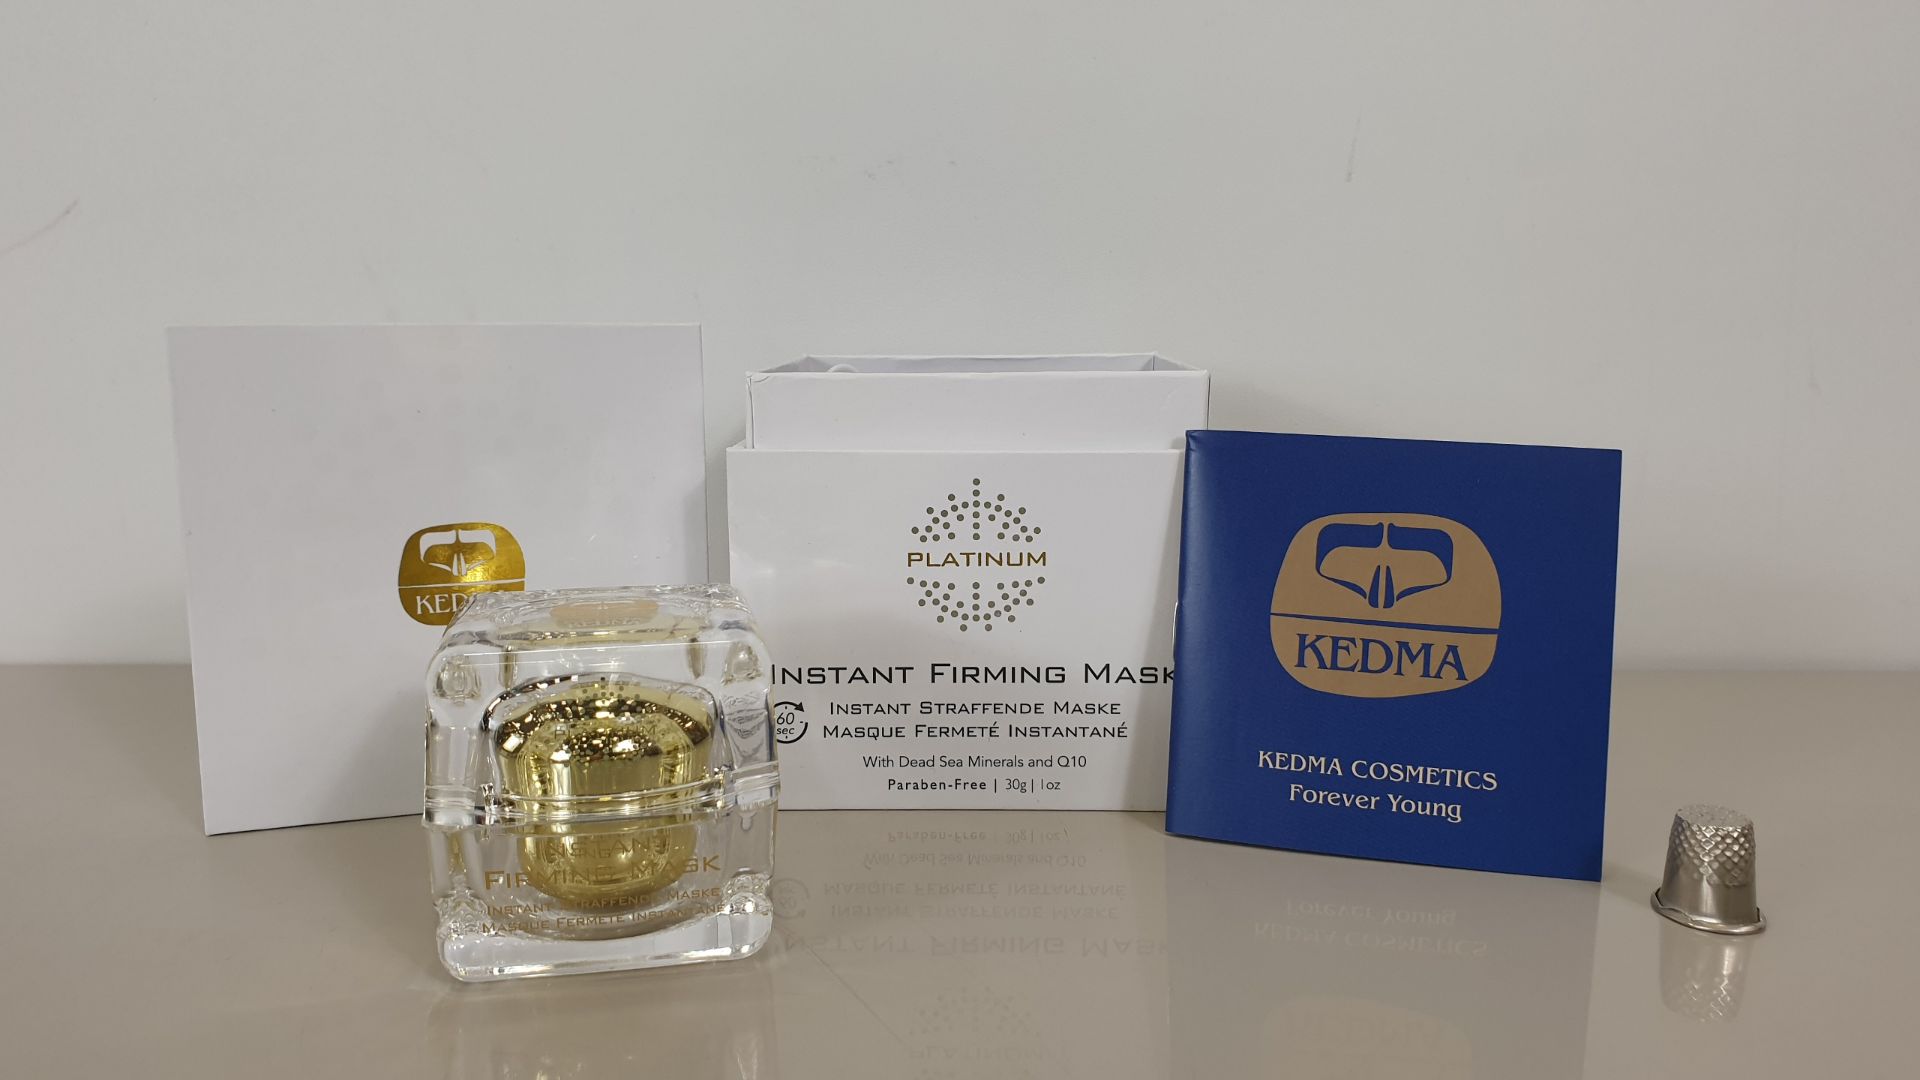 4 X BRAND NEW KEDMA PLATINUM INSTANT FIRMING MASK WITH DEAD SEA MINERALS AND Q10 (PARABEN FREE)